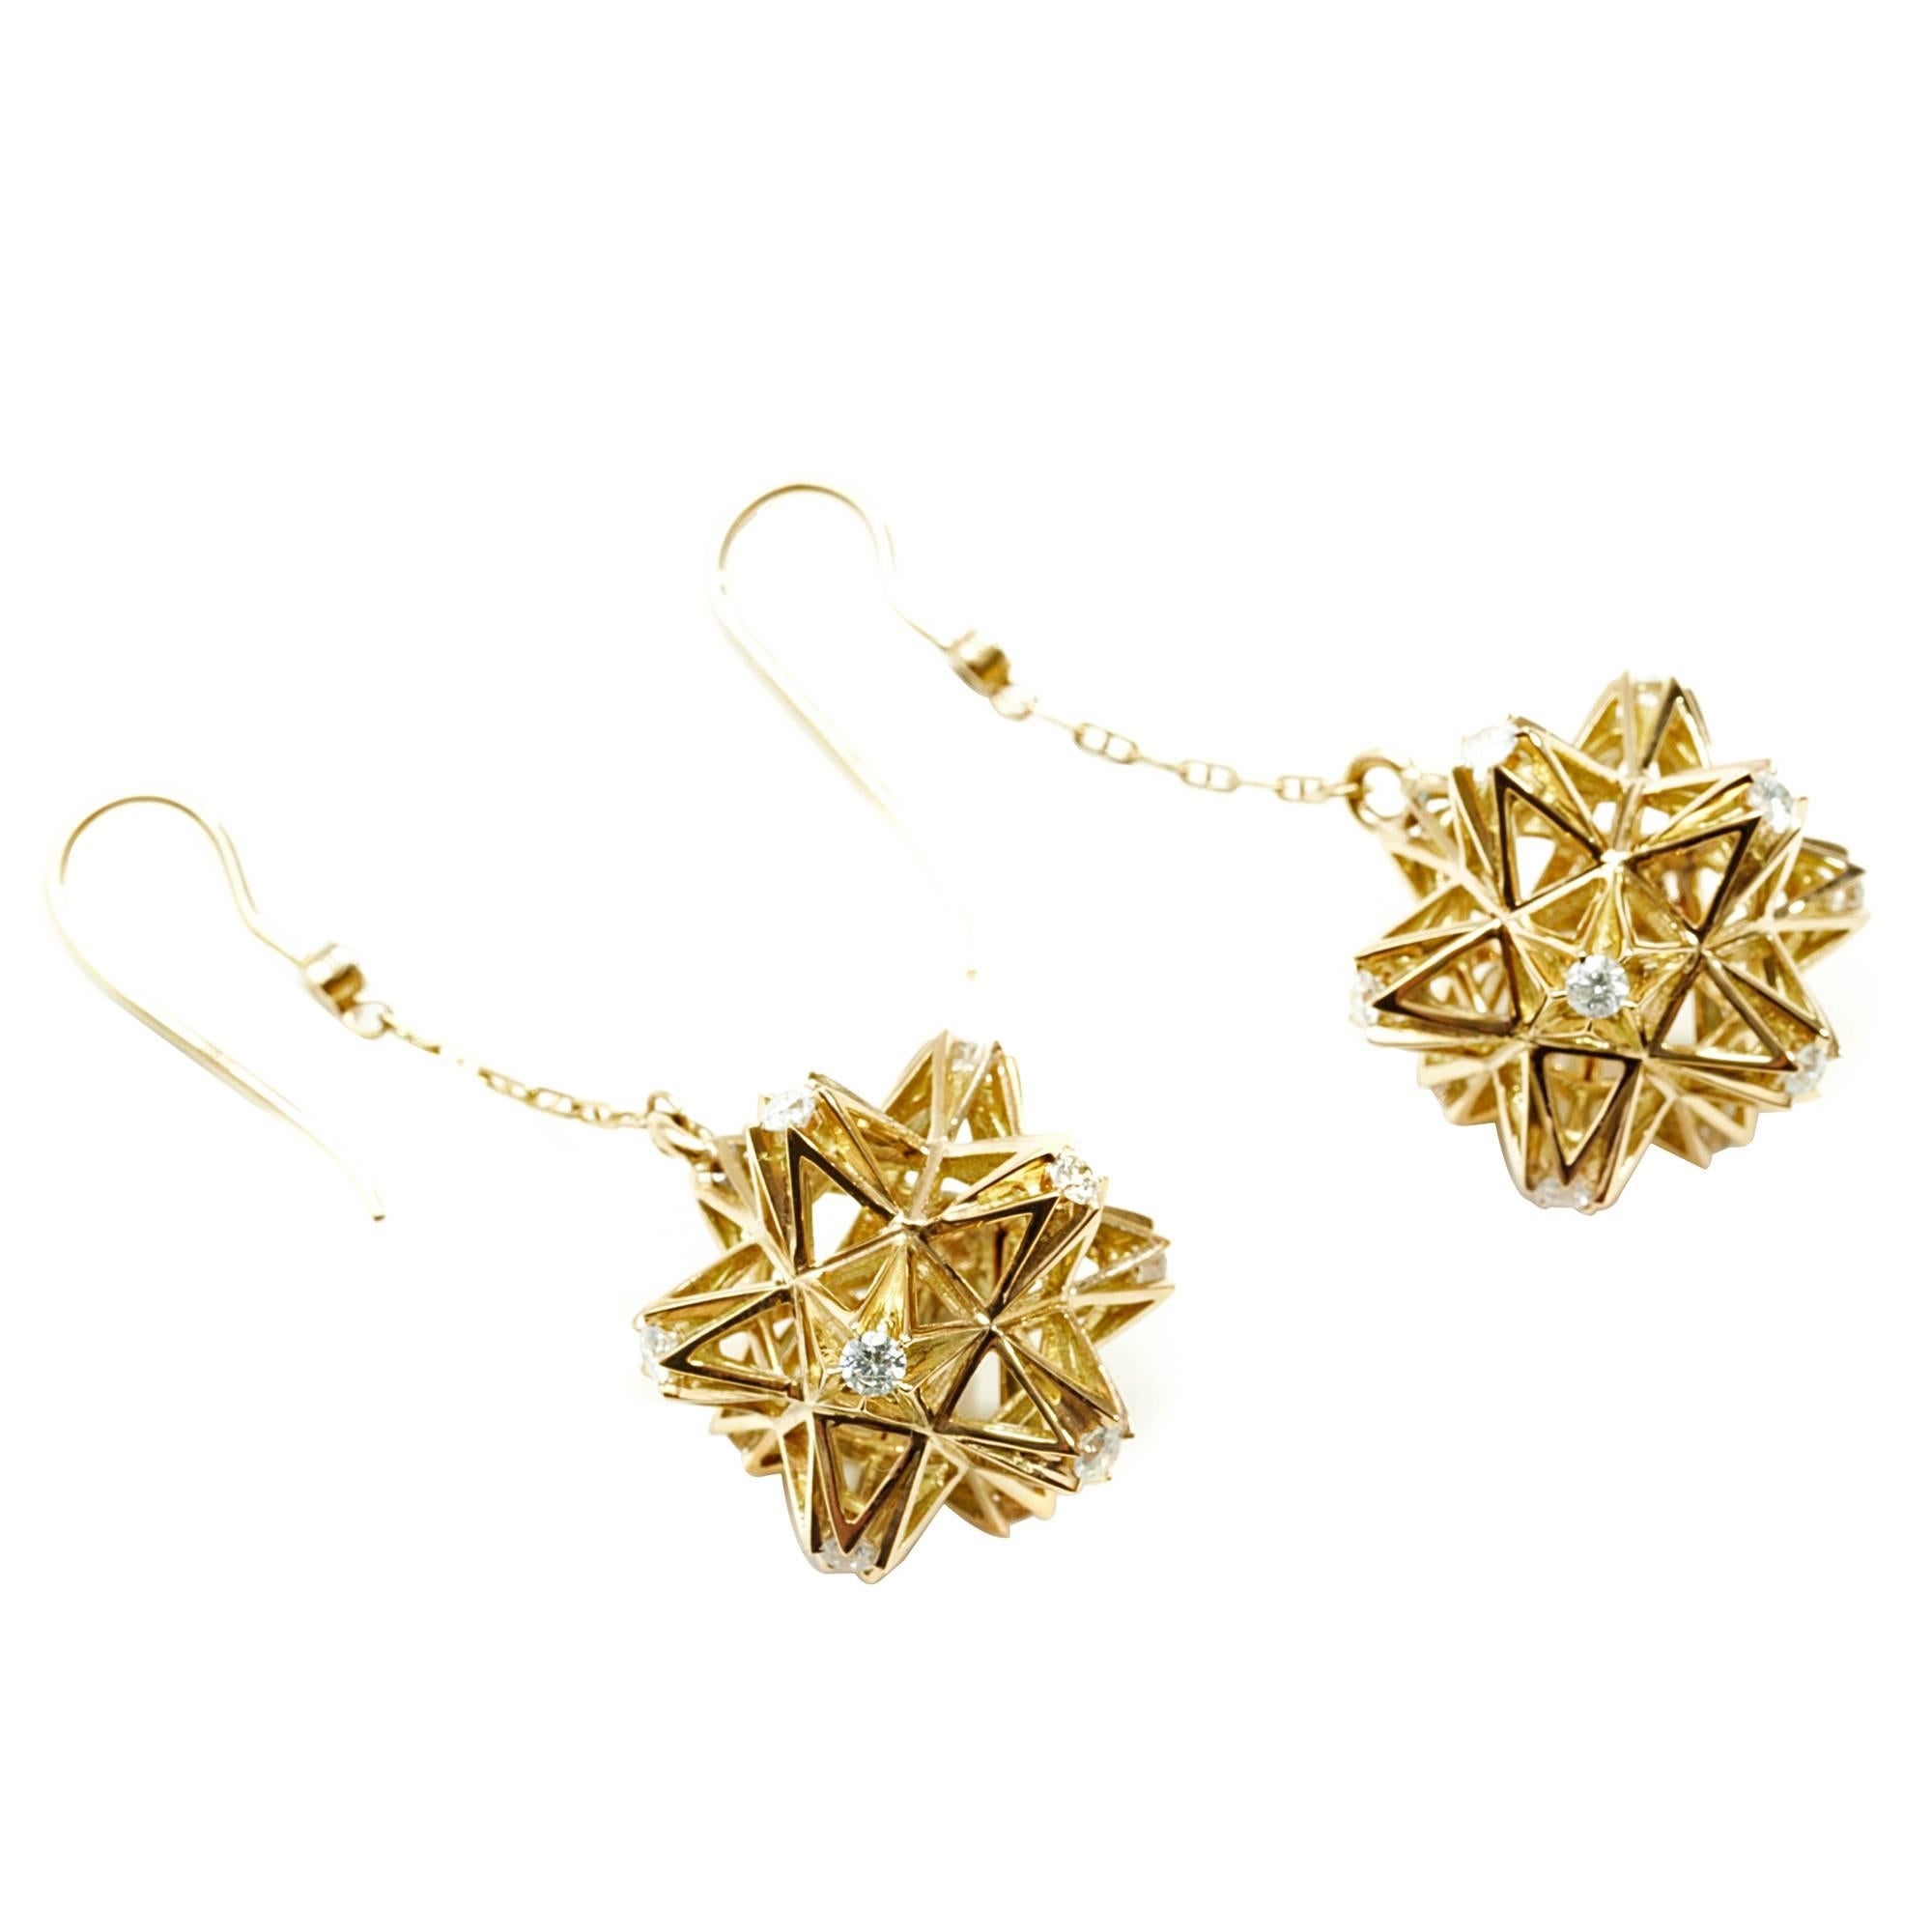 These limited edition earrings are inspired by sacred geometries and represent an exploding star. The tetrahedral form with exploded tips represents breaking away from old conditioned structure to reveal an empowered future. These Verahedra